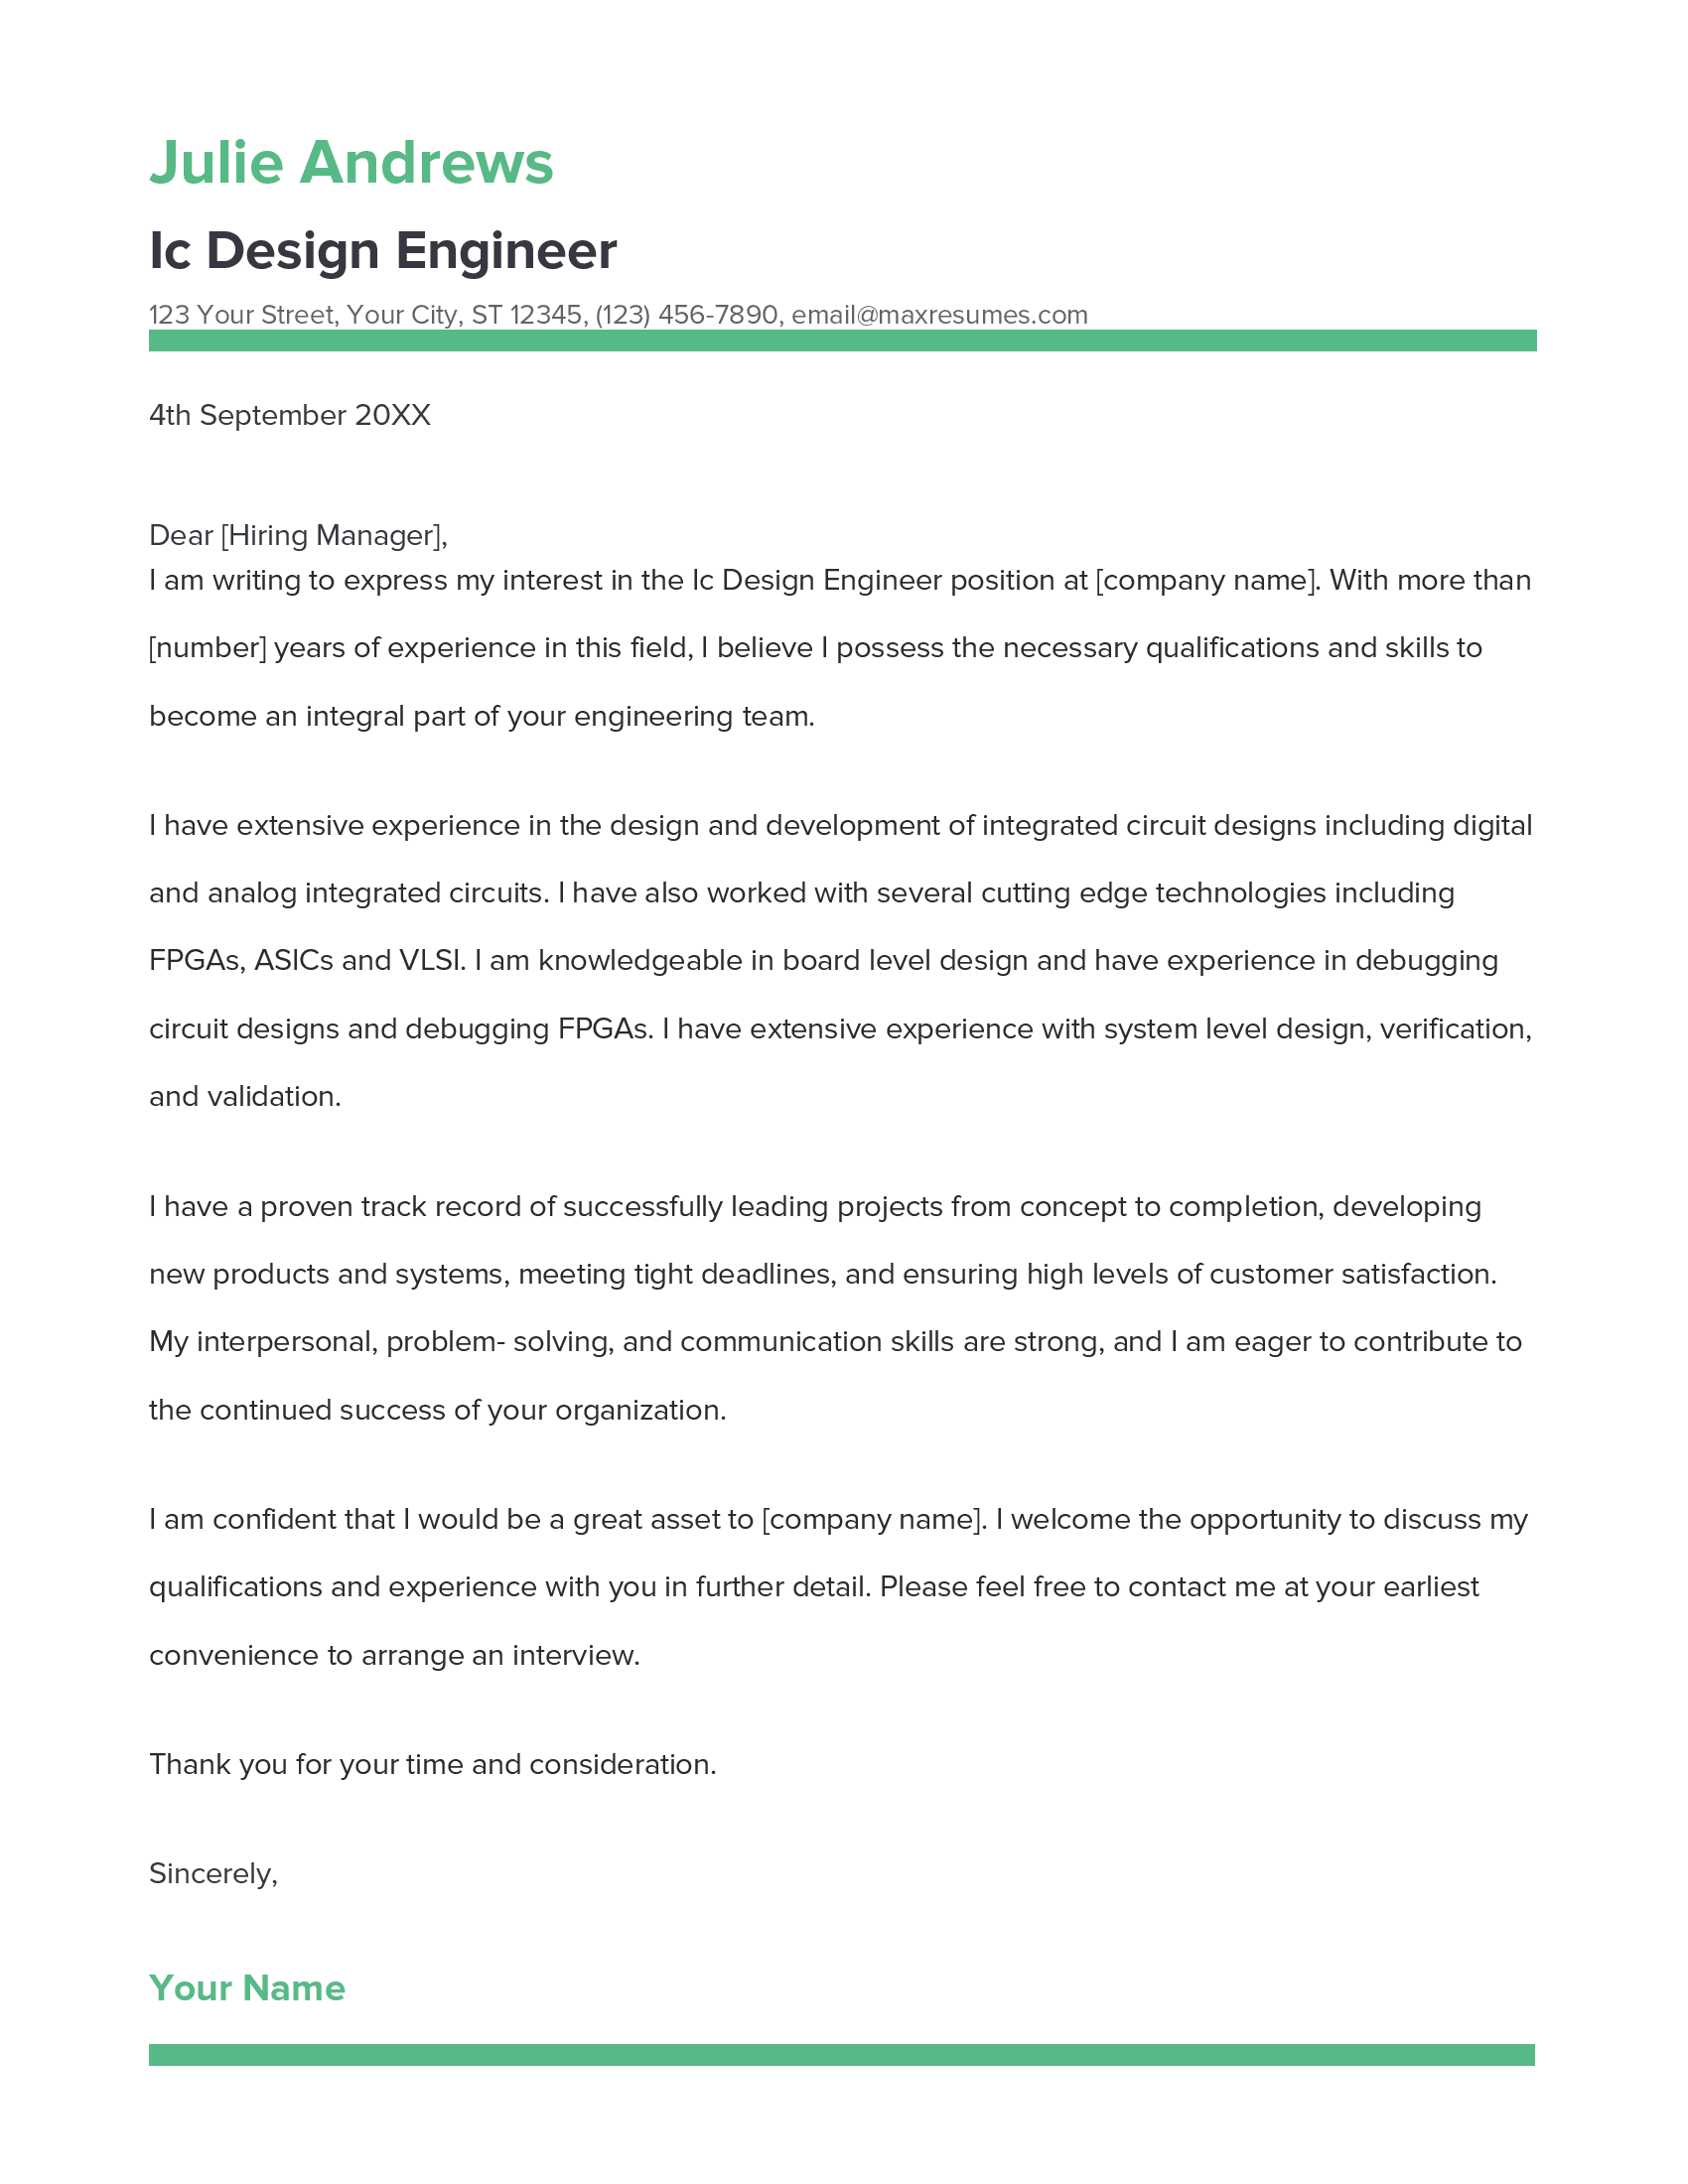 Ic Design Engineer Cover Letter Example